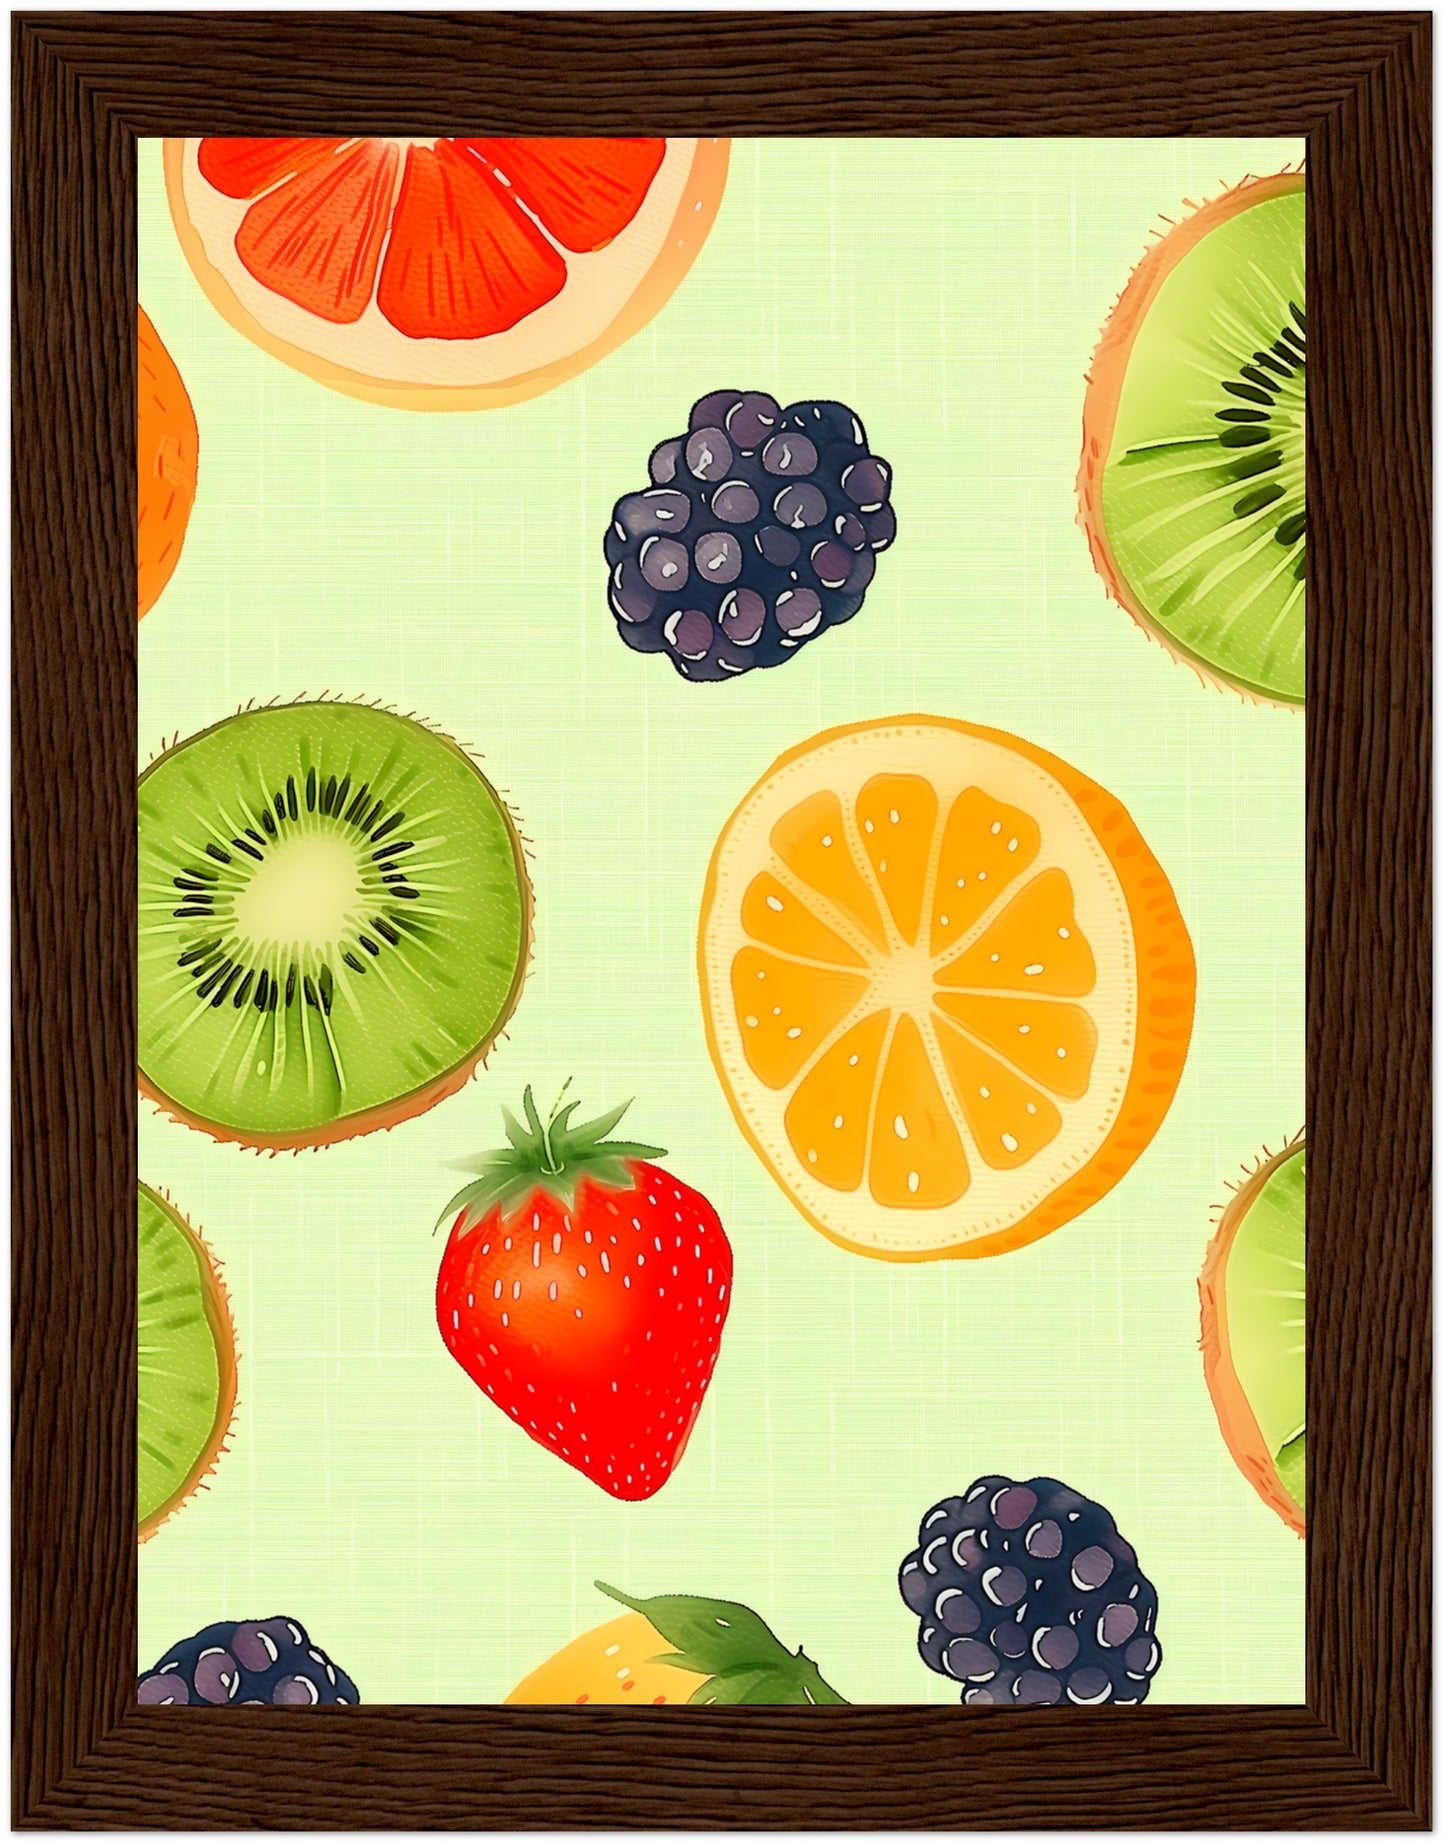 Colorful illustration of various fruits including strawberries, kiwis, and oranges on a patterned background.